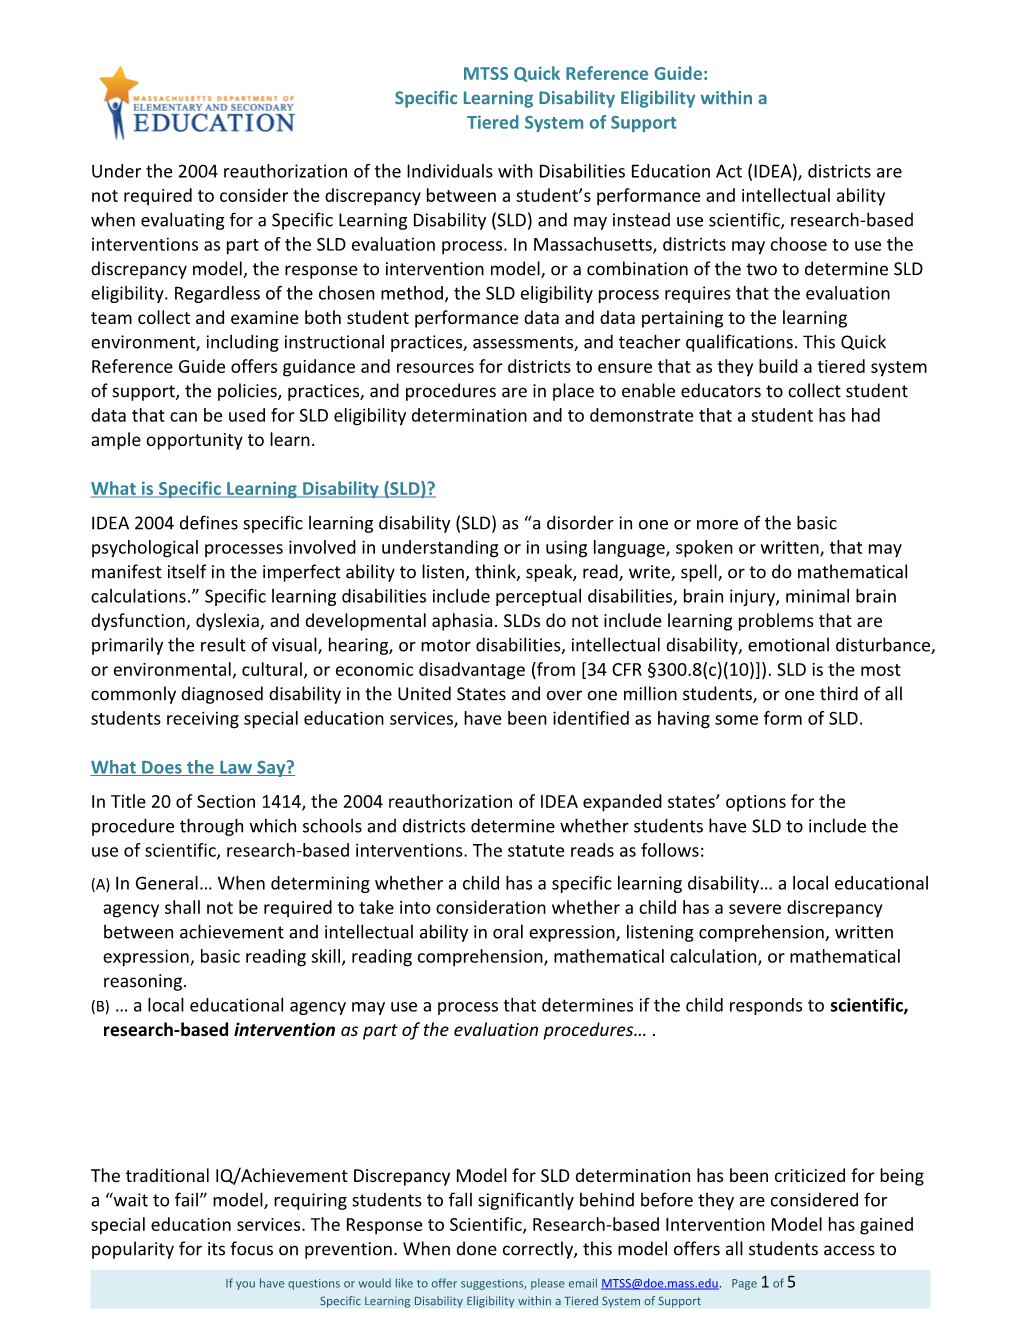 MTSS Quick Reference Guide: Specific Learning Disability Eligibility Within a Tiered System